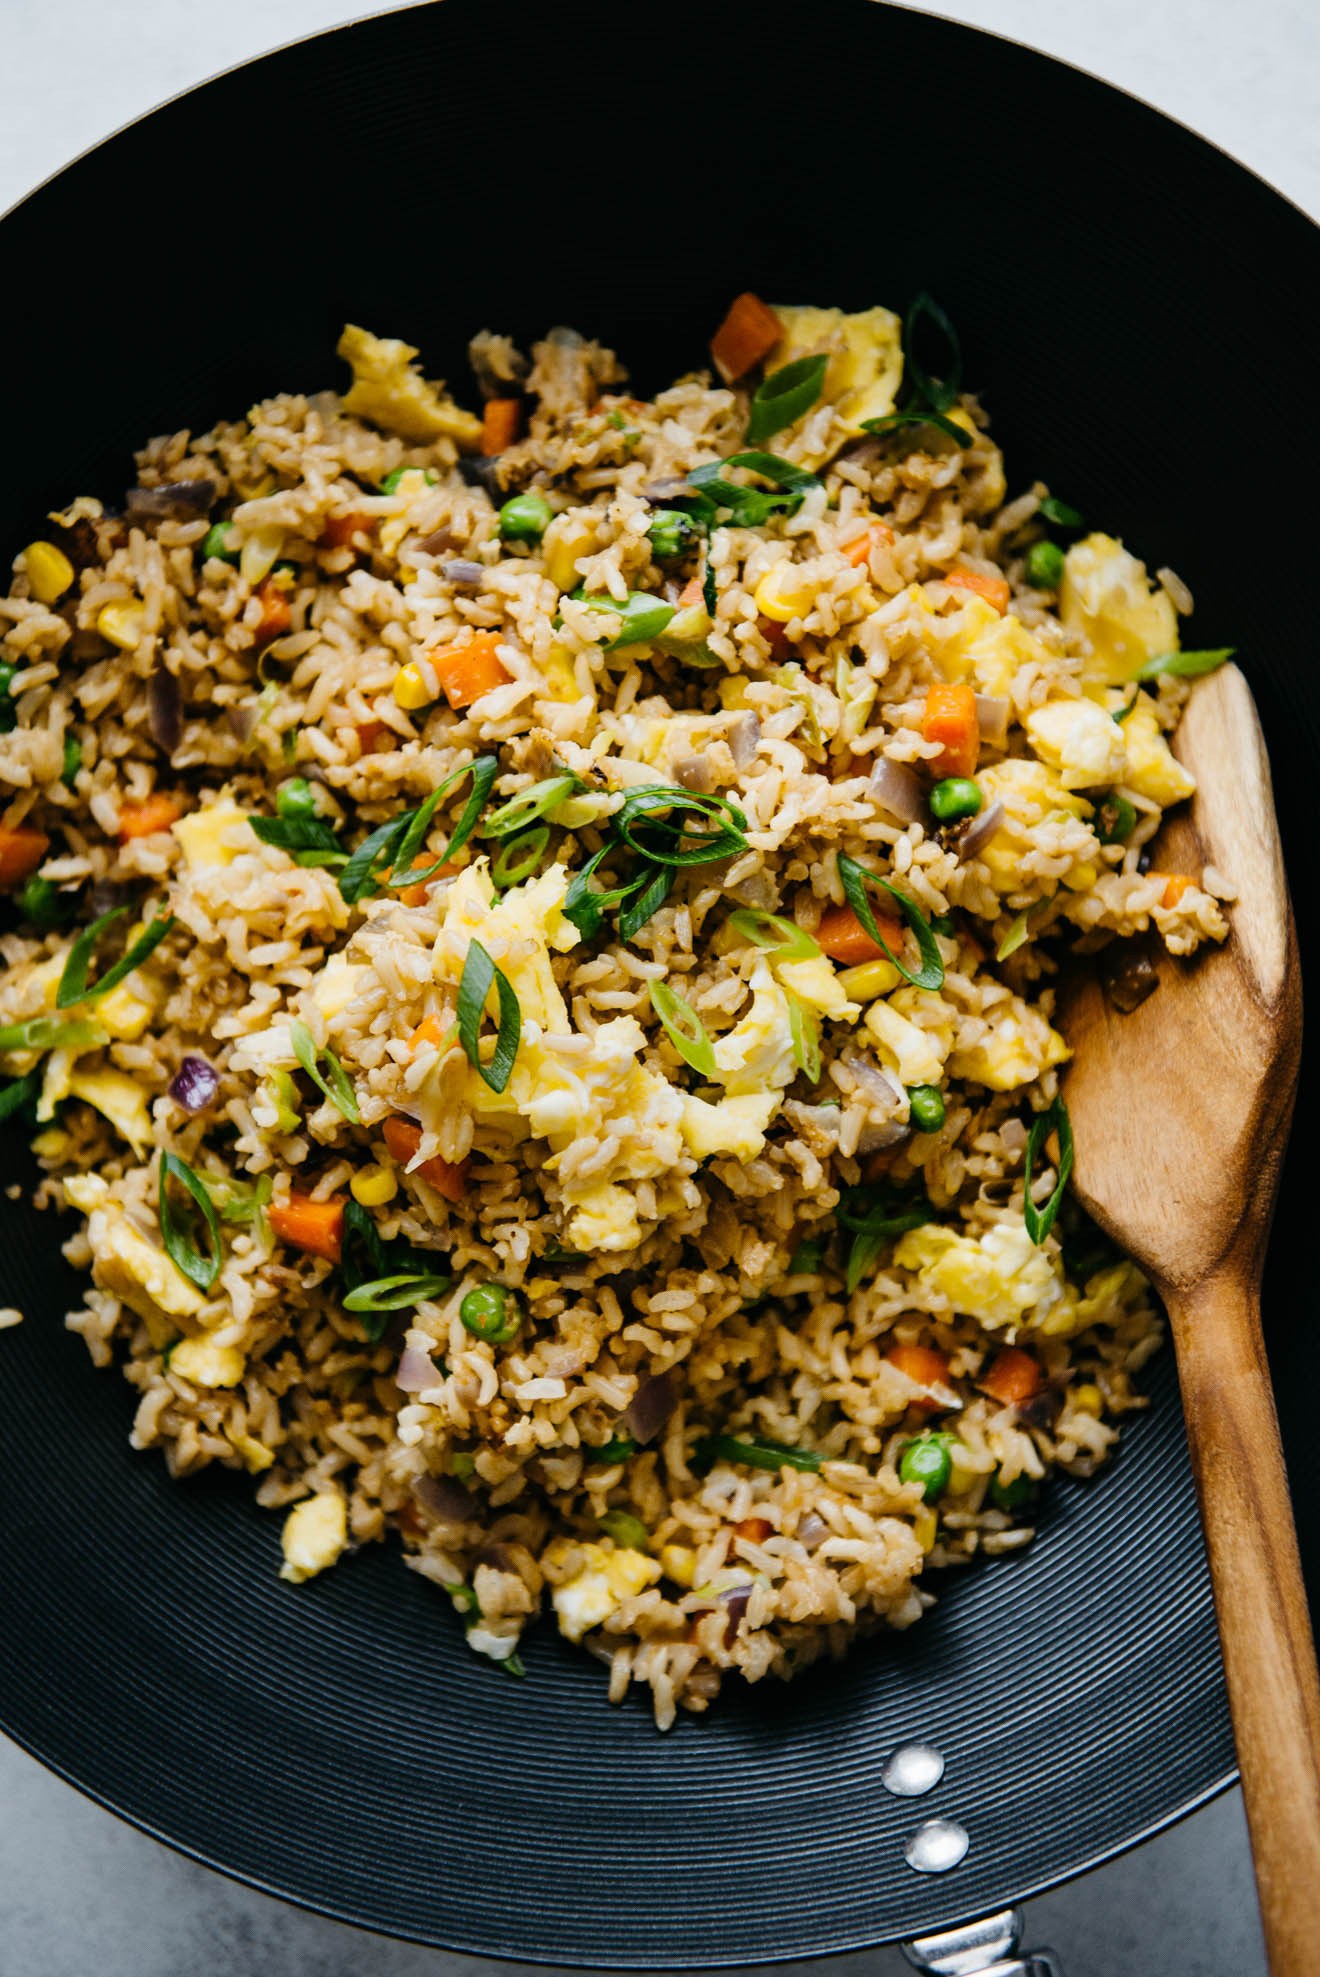 Egg Fried Rice Recipes
 The Easiest Egg Fried Rice 20 Minutes